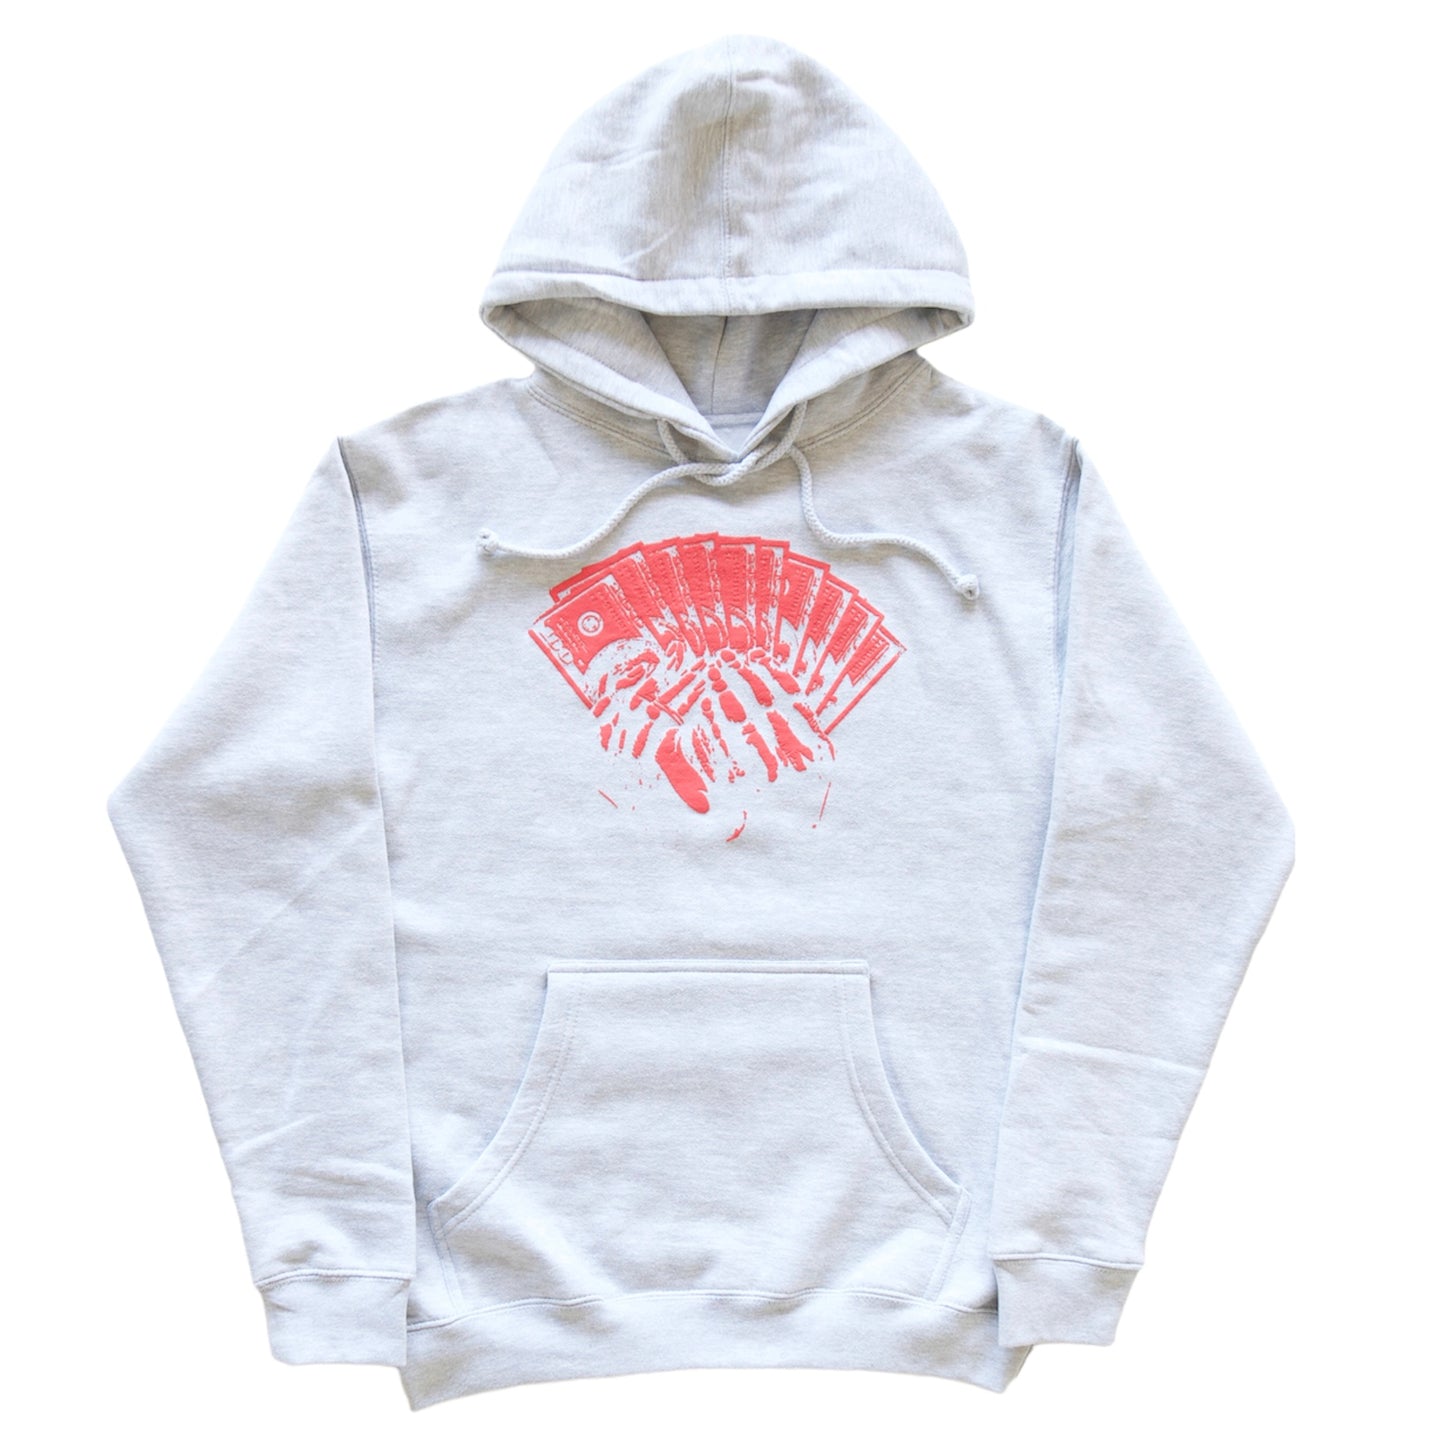 Heather Gray “I Need More Bandz And Less Friends” Hoodie